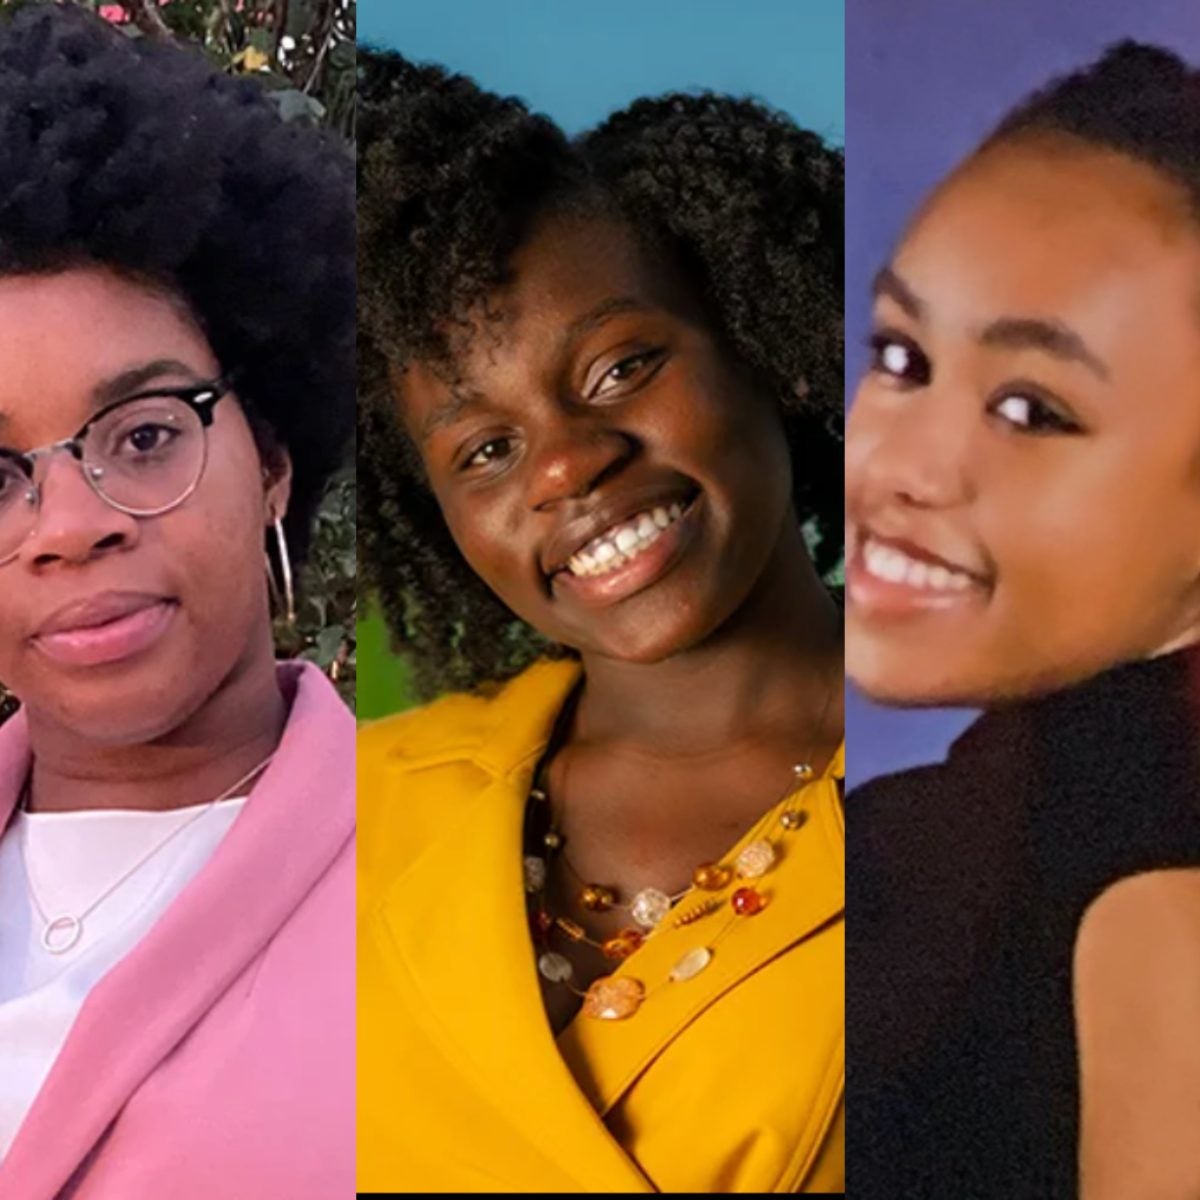 CBS Celebrates Young Black Women Impacting Change By Carrying On The Legacies Of Their 'Unstoppable Equalizers'